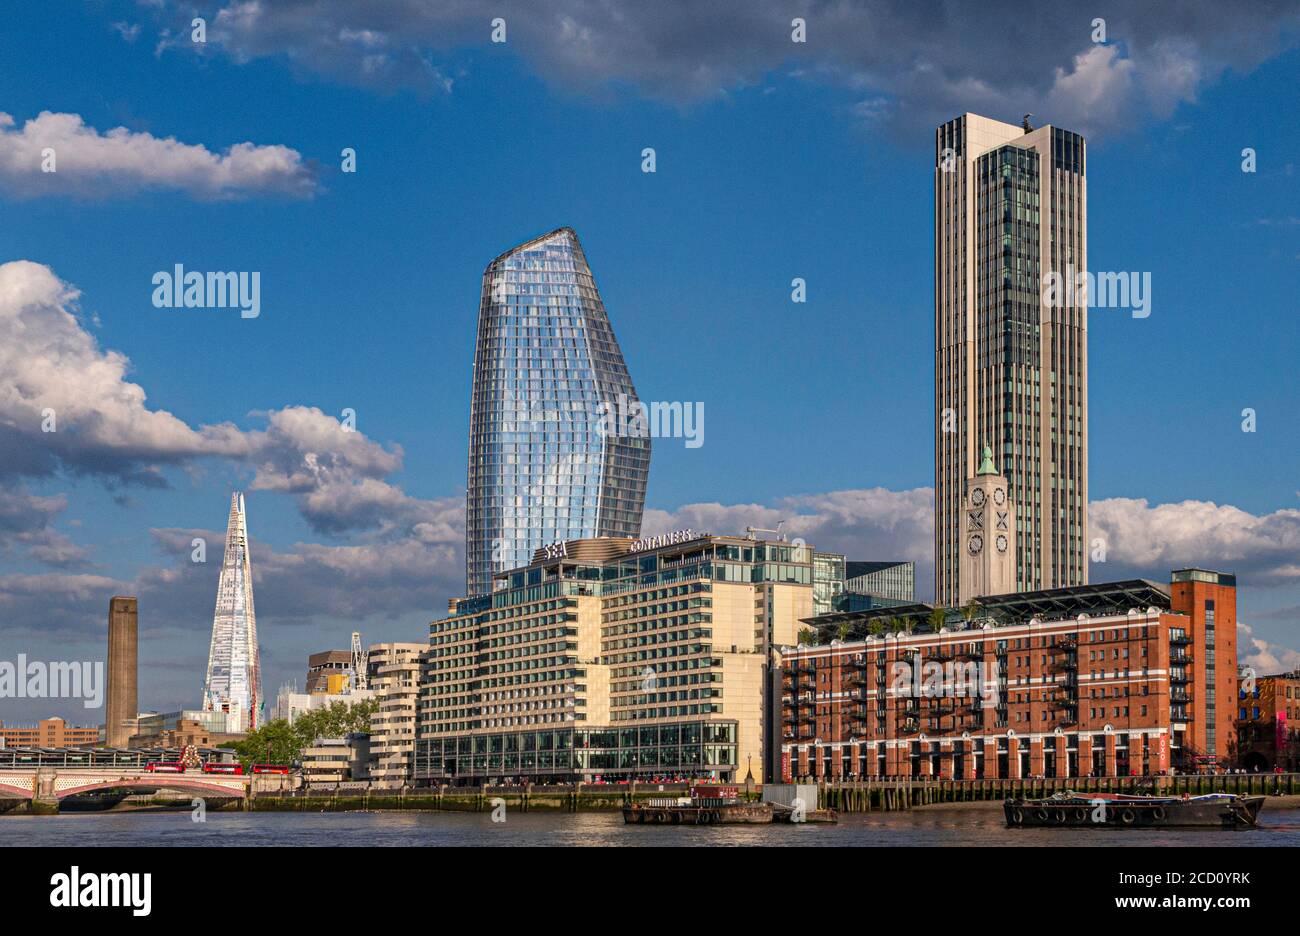 SOUTH BANK Sea Containers Hotel Complex, Bank Towers Cityscape River Thames, Oxo Tower & Wharf, One Blackfriars with The London Shard and Tate Modern River Thames South Bank London UK Stock Photo